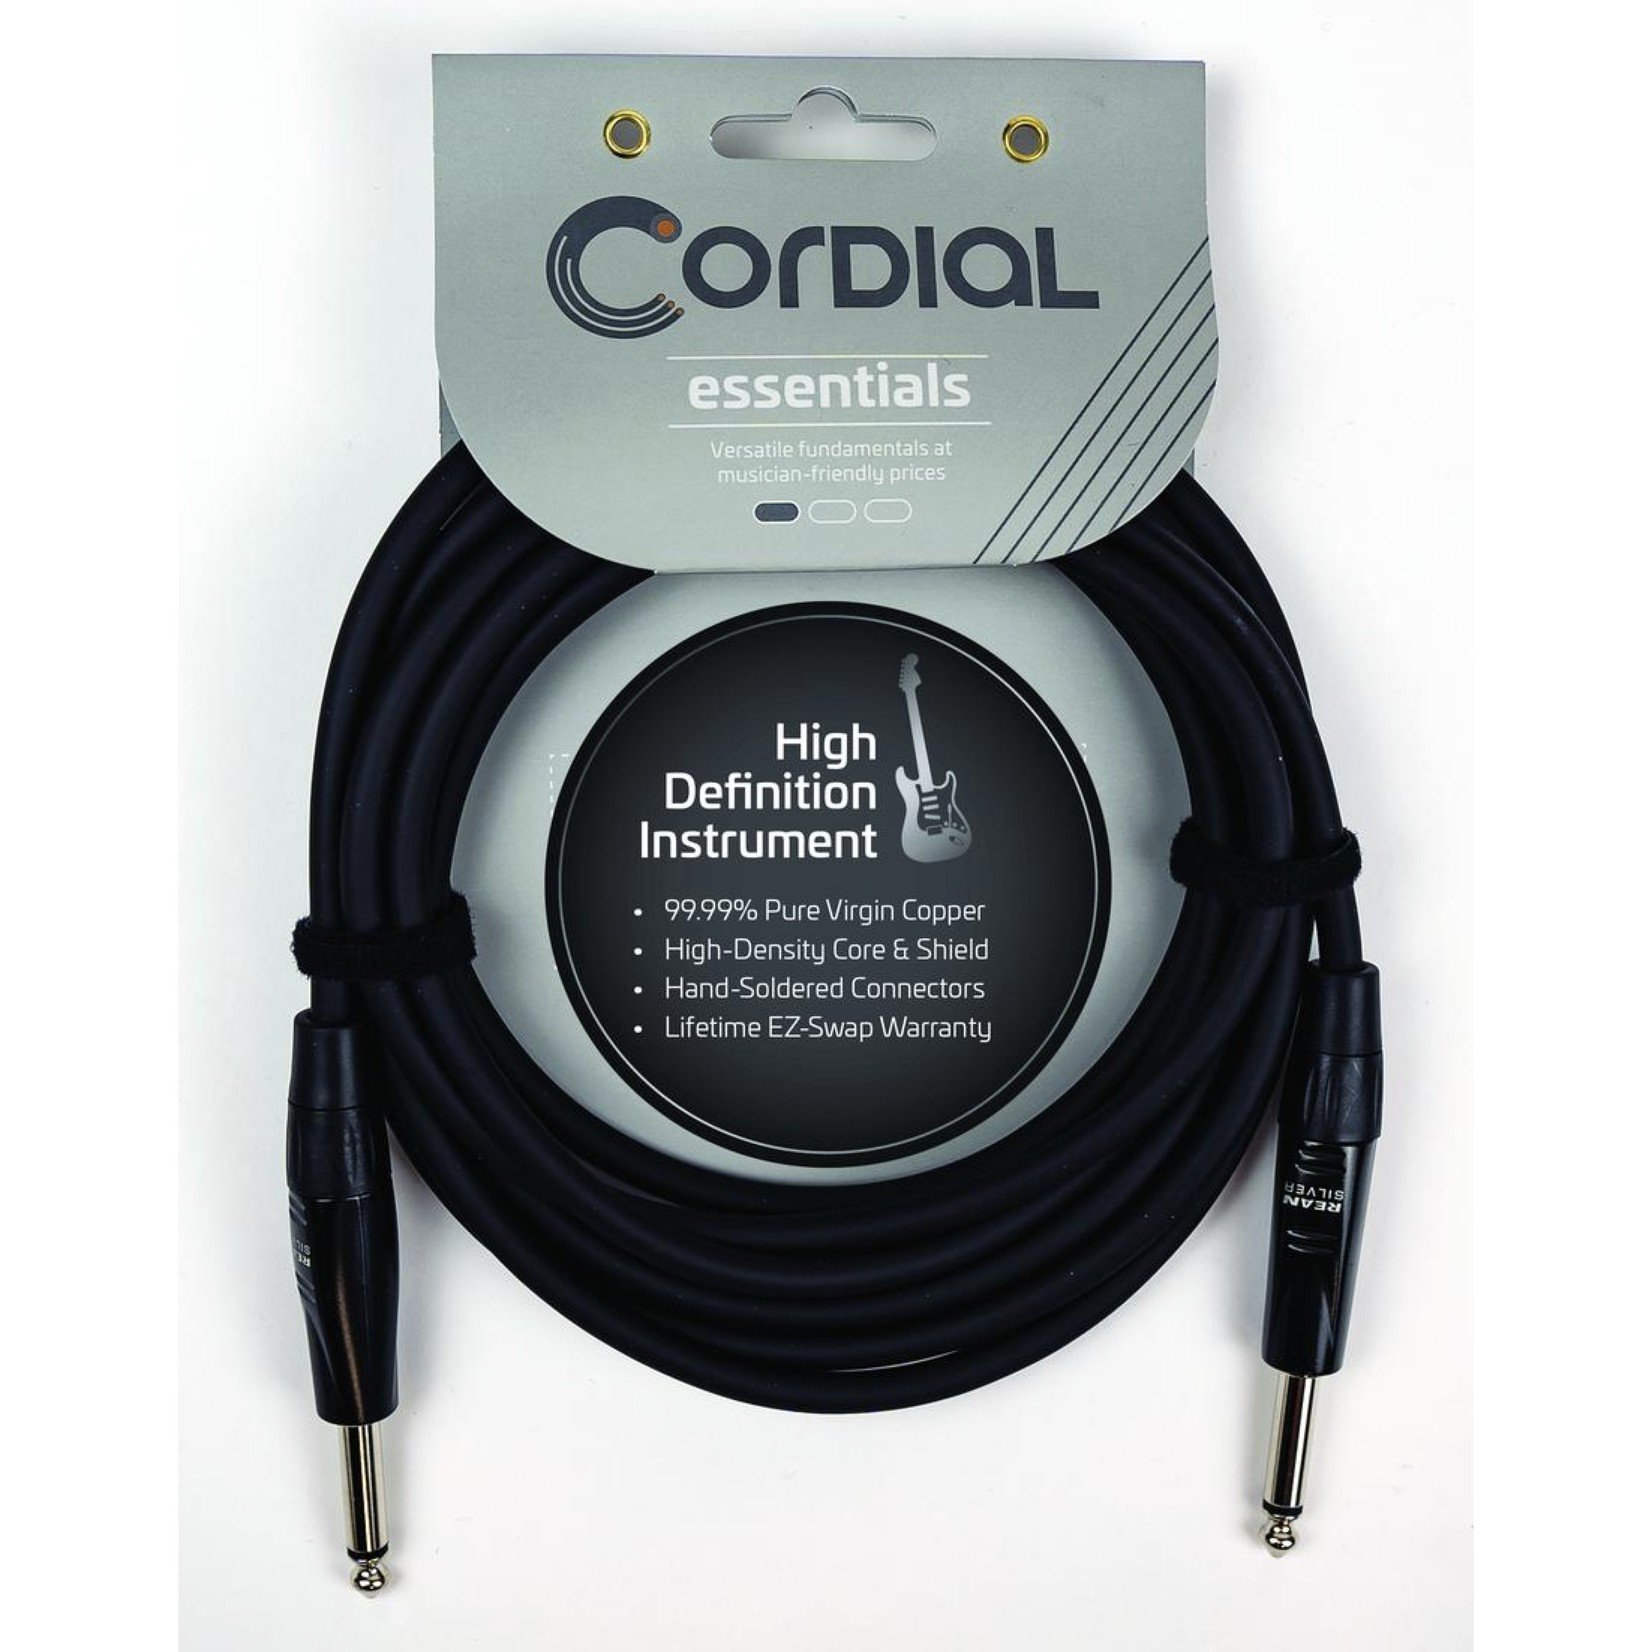 Cordial Cables Cordial Cables 10-foot Instrument/Guitar Cable with Neutrik Style Connectors (REAN), Essential Series - 1/4" TS to 1/4" TS Straight